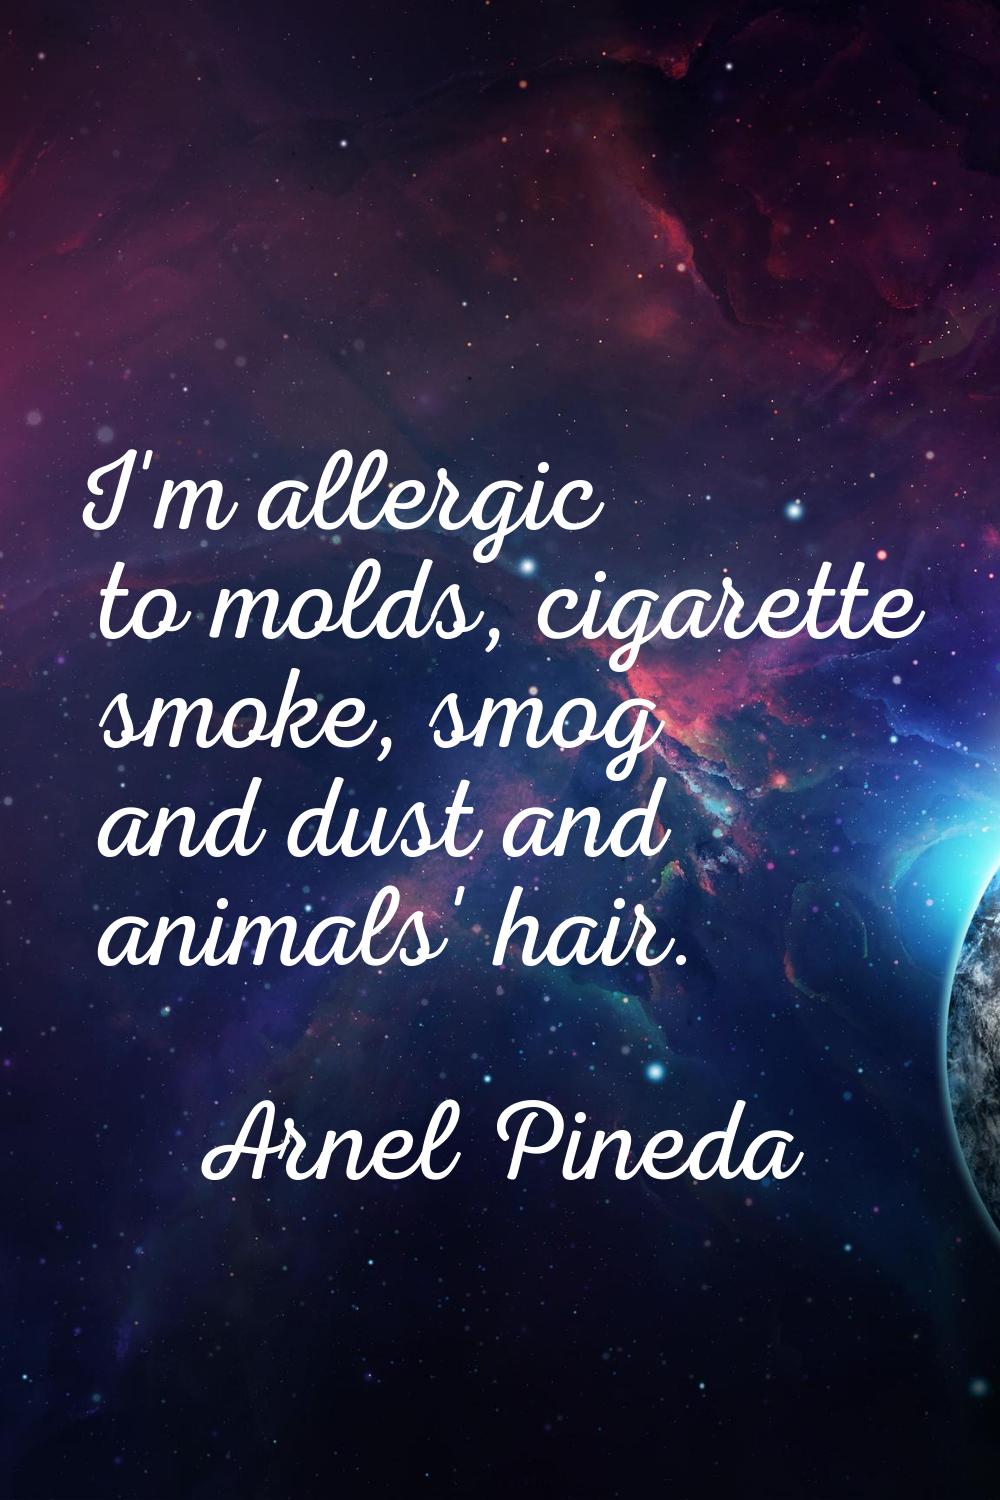 I'm allergic to molds, cigarette smoke, smog and dust and animals' hair.